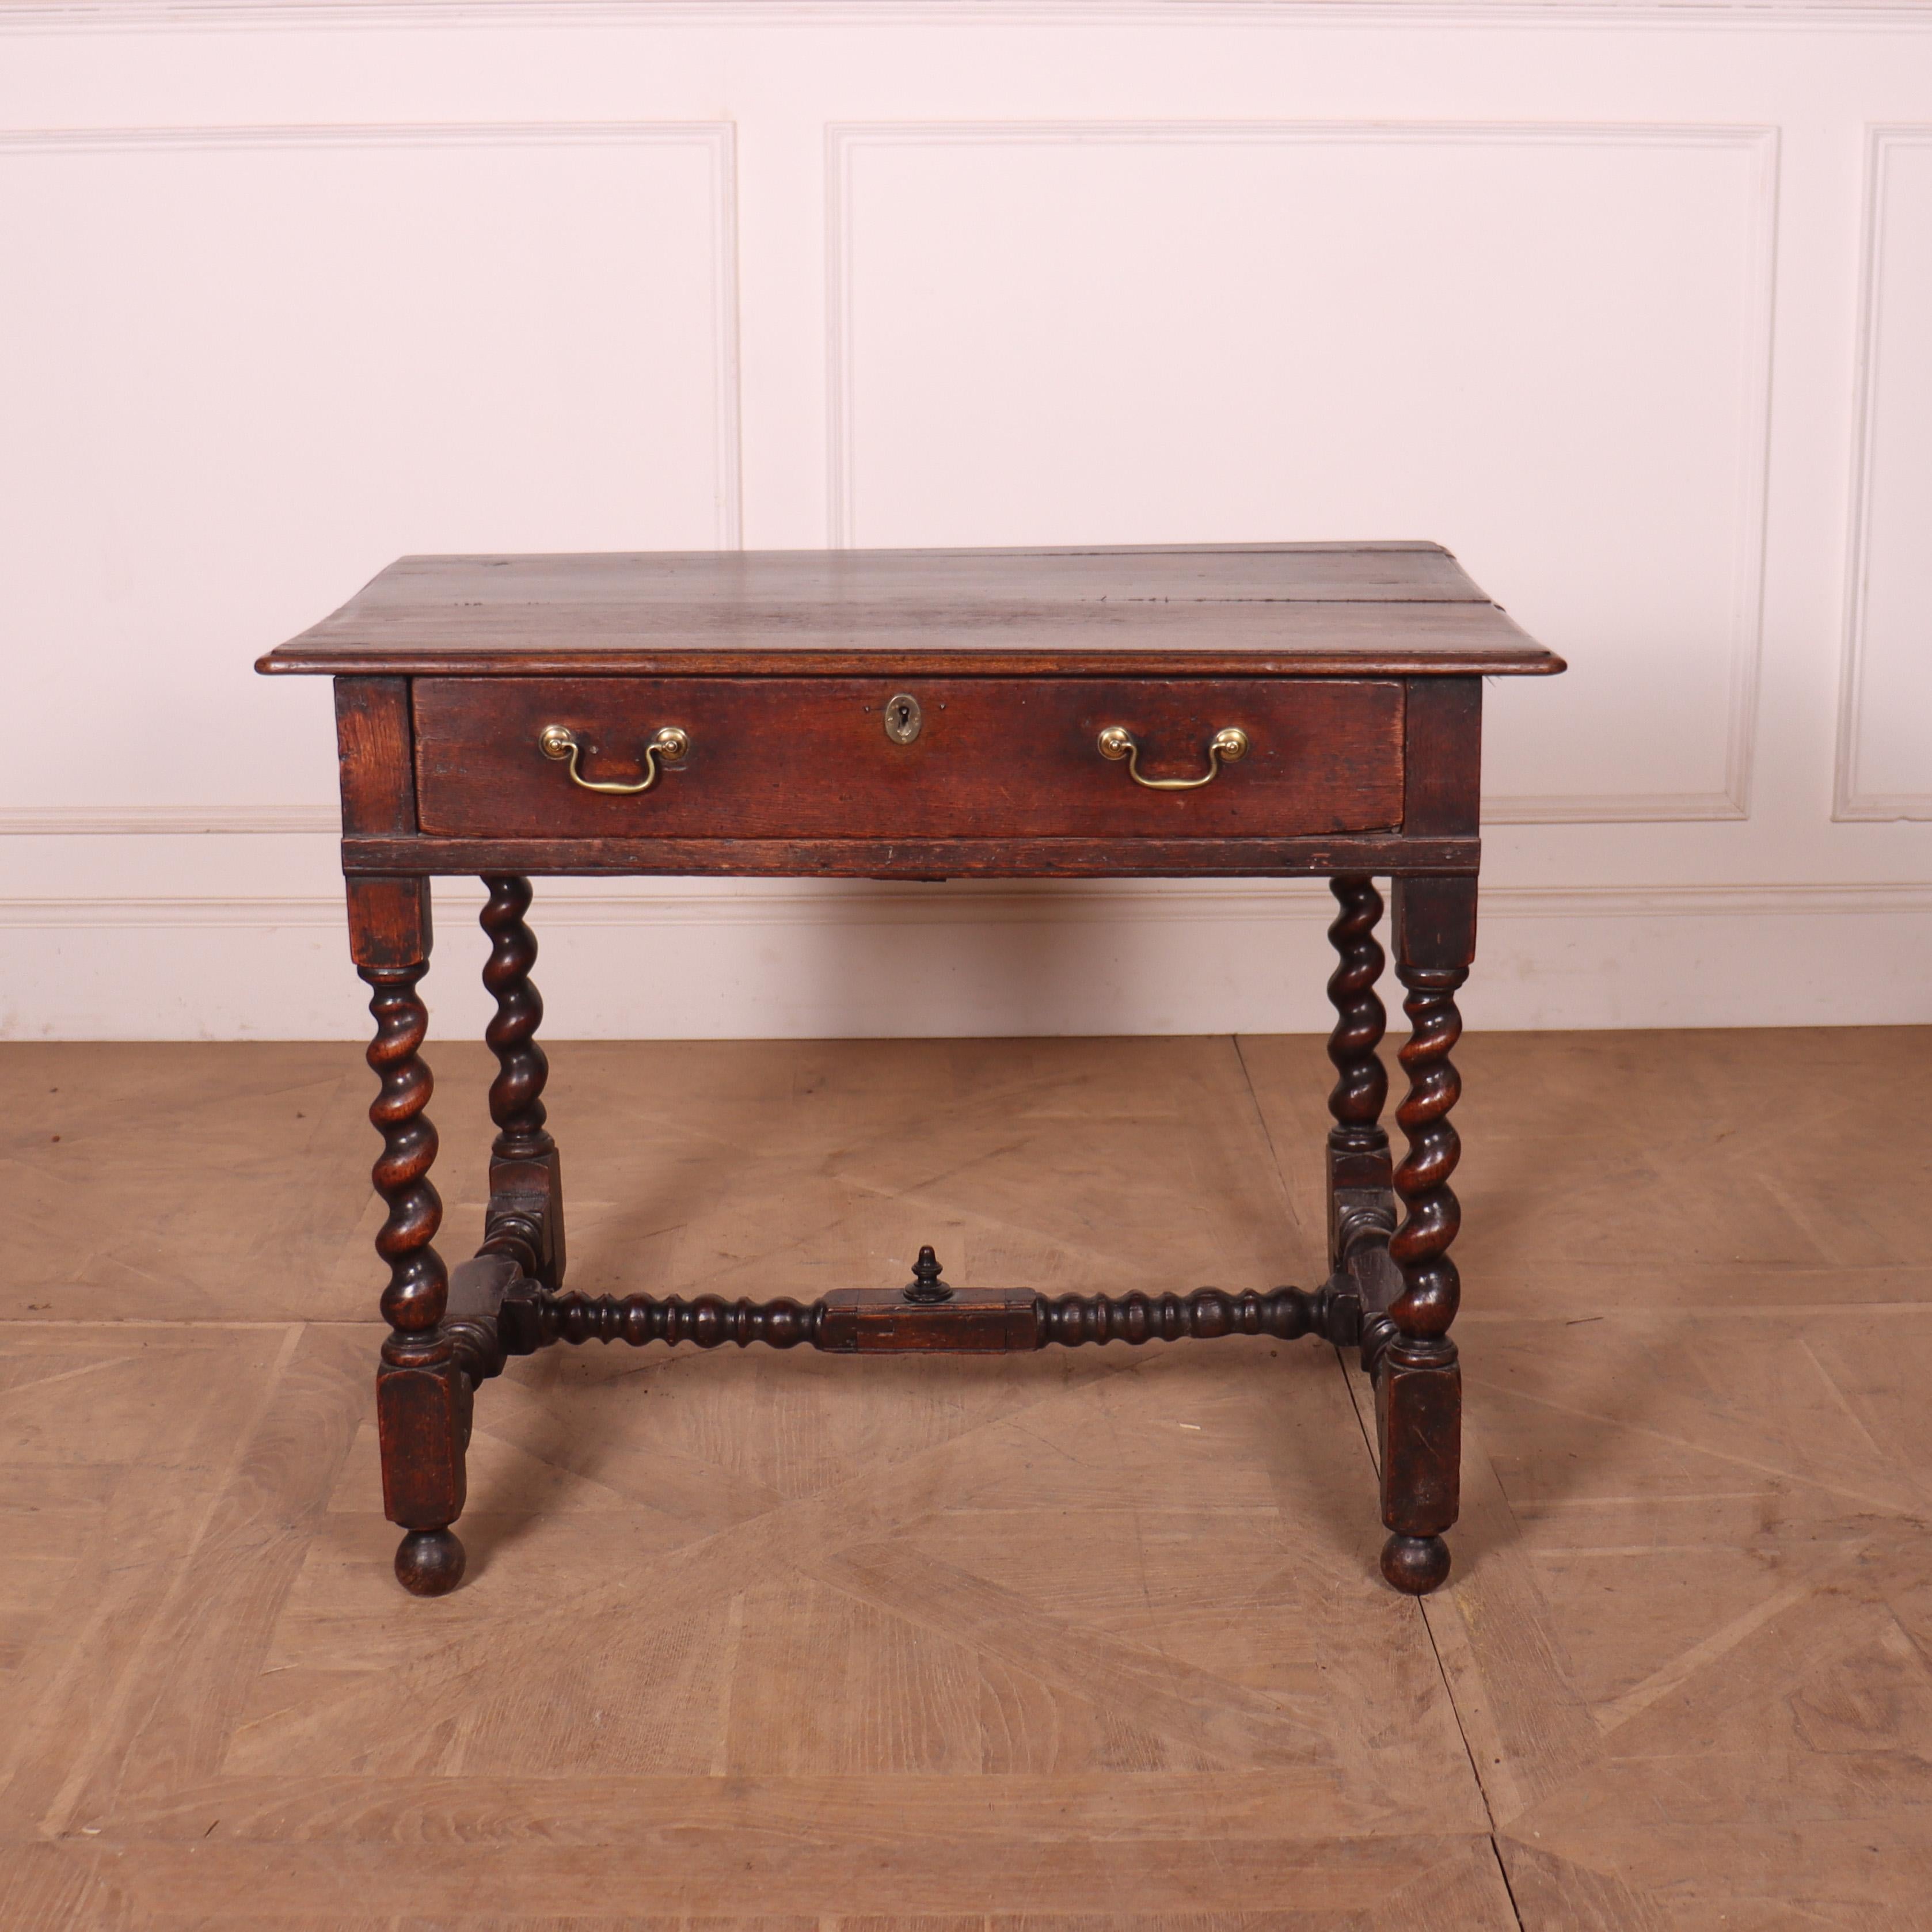 18th C English oak 1 drawer lamp table with barley twist legs. 1760

Reference: 8207

Dimensions
35 inches (89 cms) Wide
23.5 inches (60 cms) Deep
27.5 inches (70 cms) High